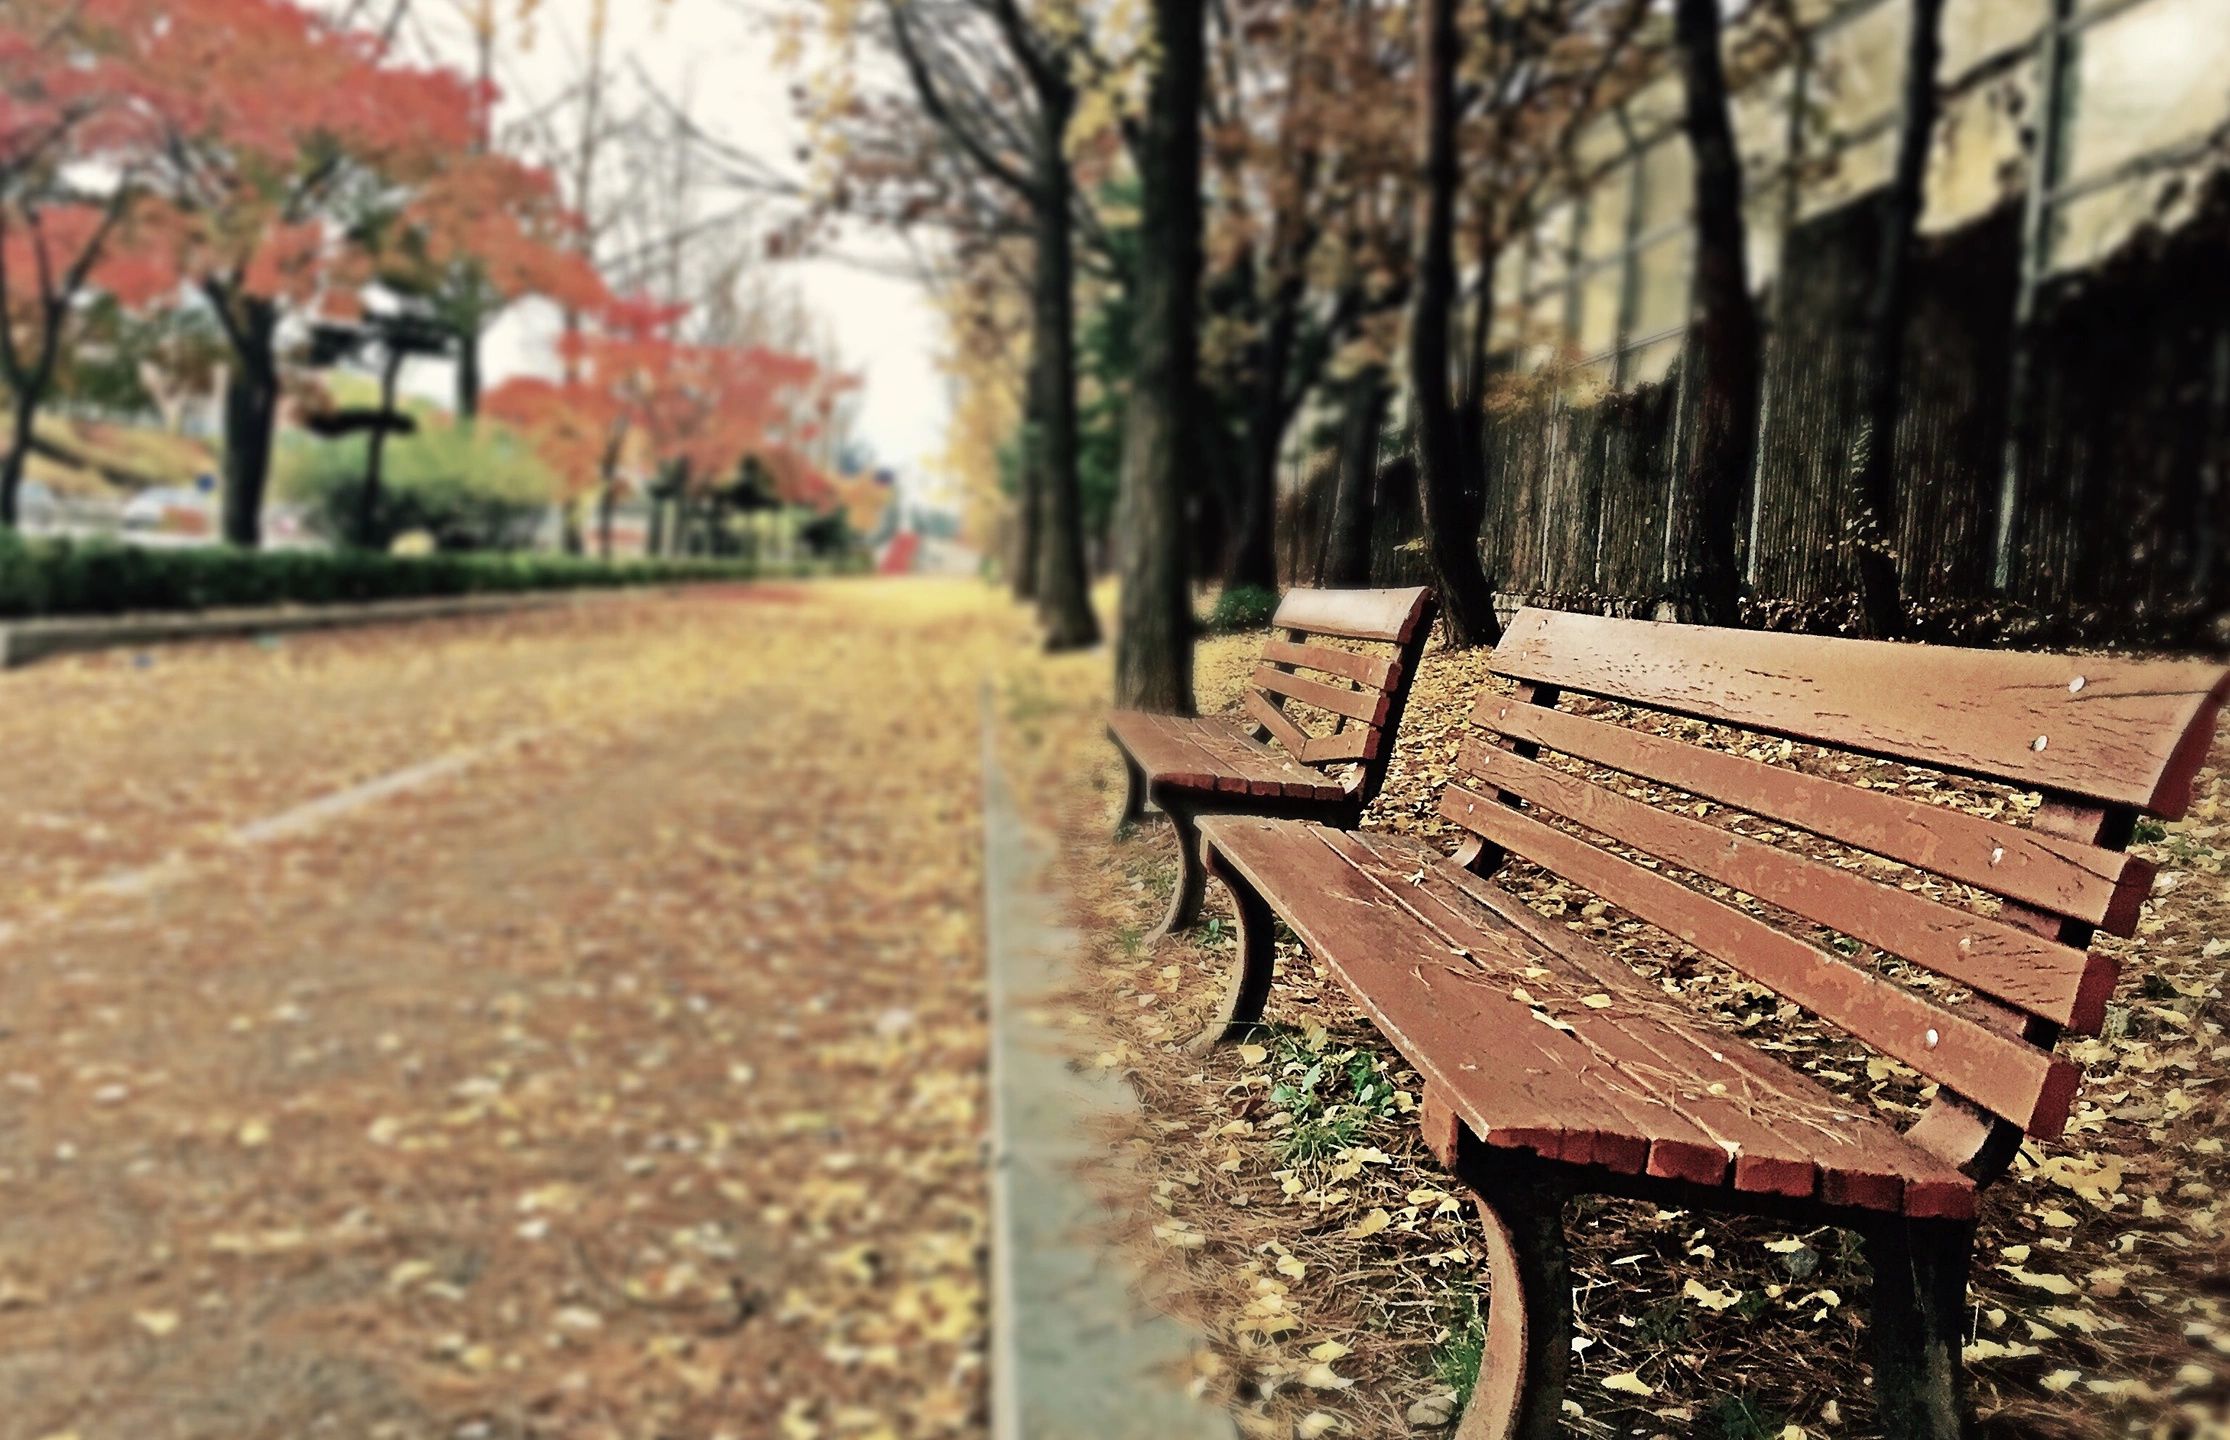 park bench with fall leaves on the ground